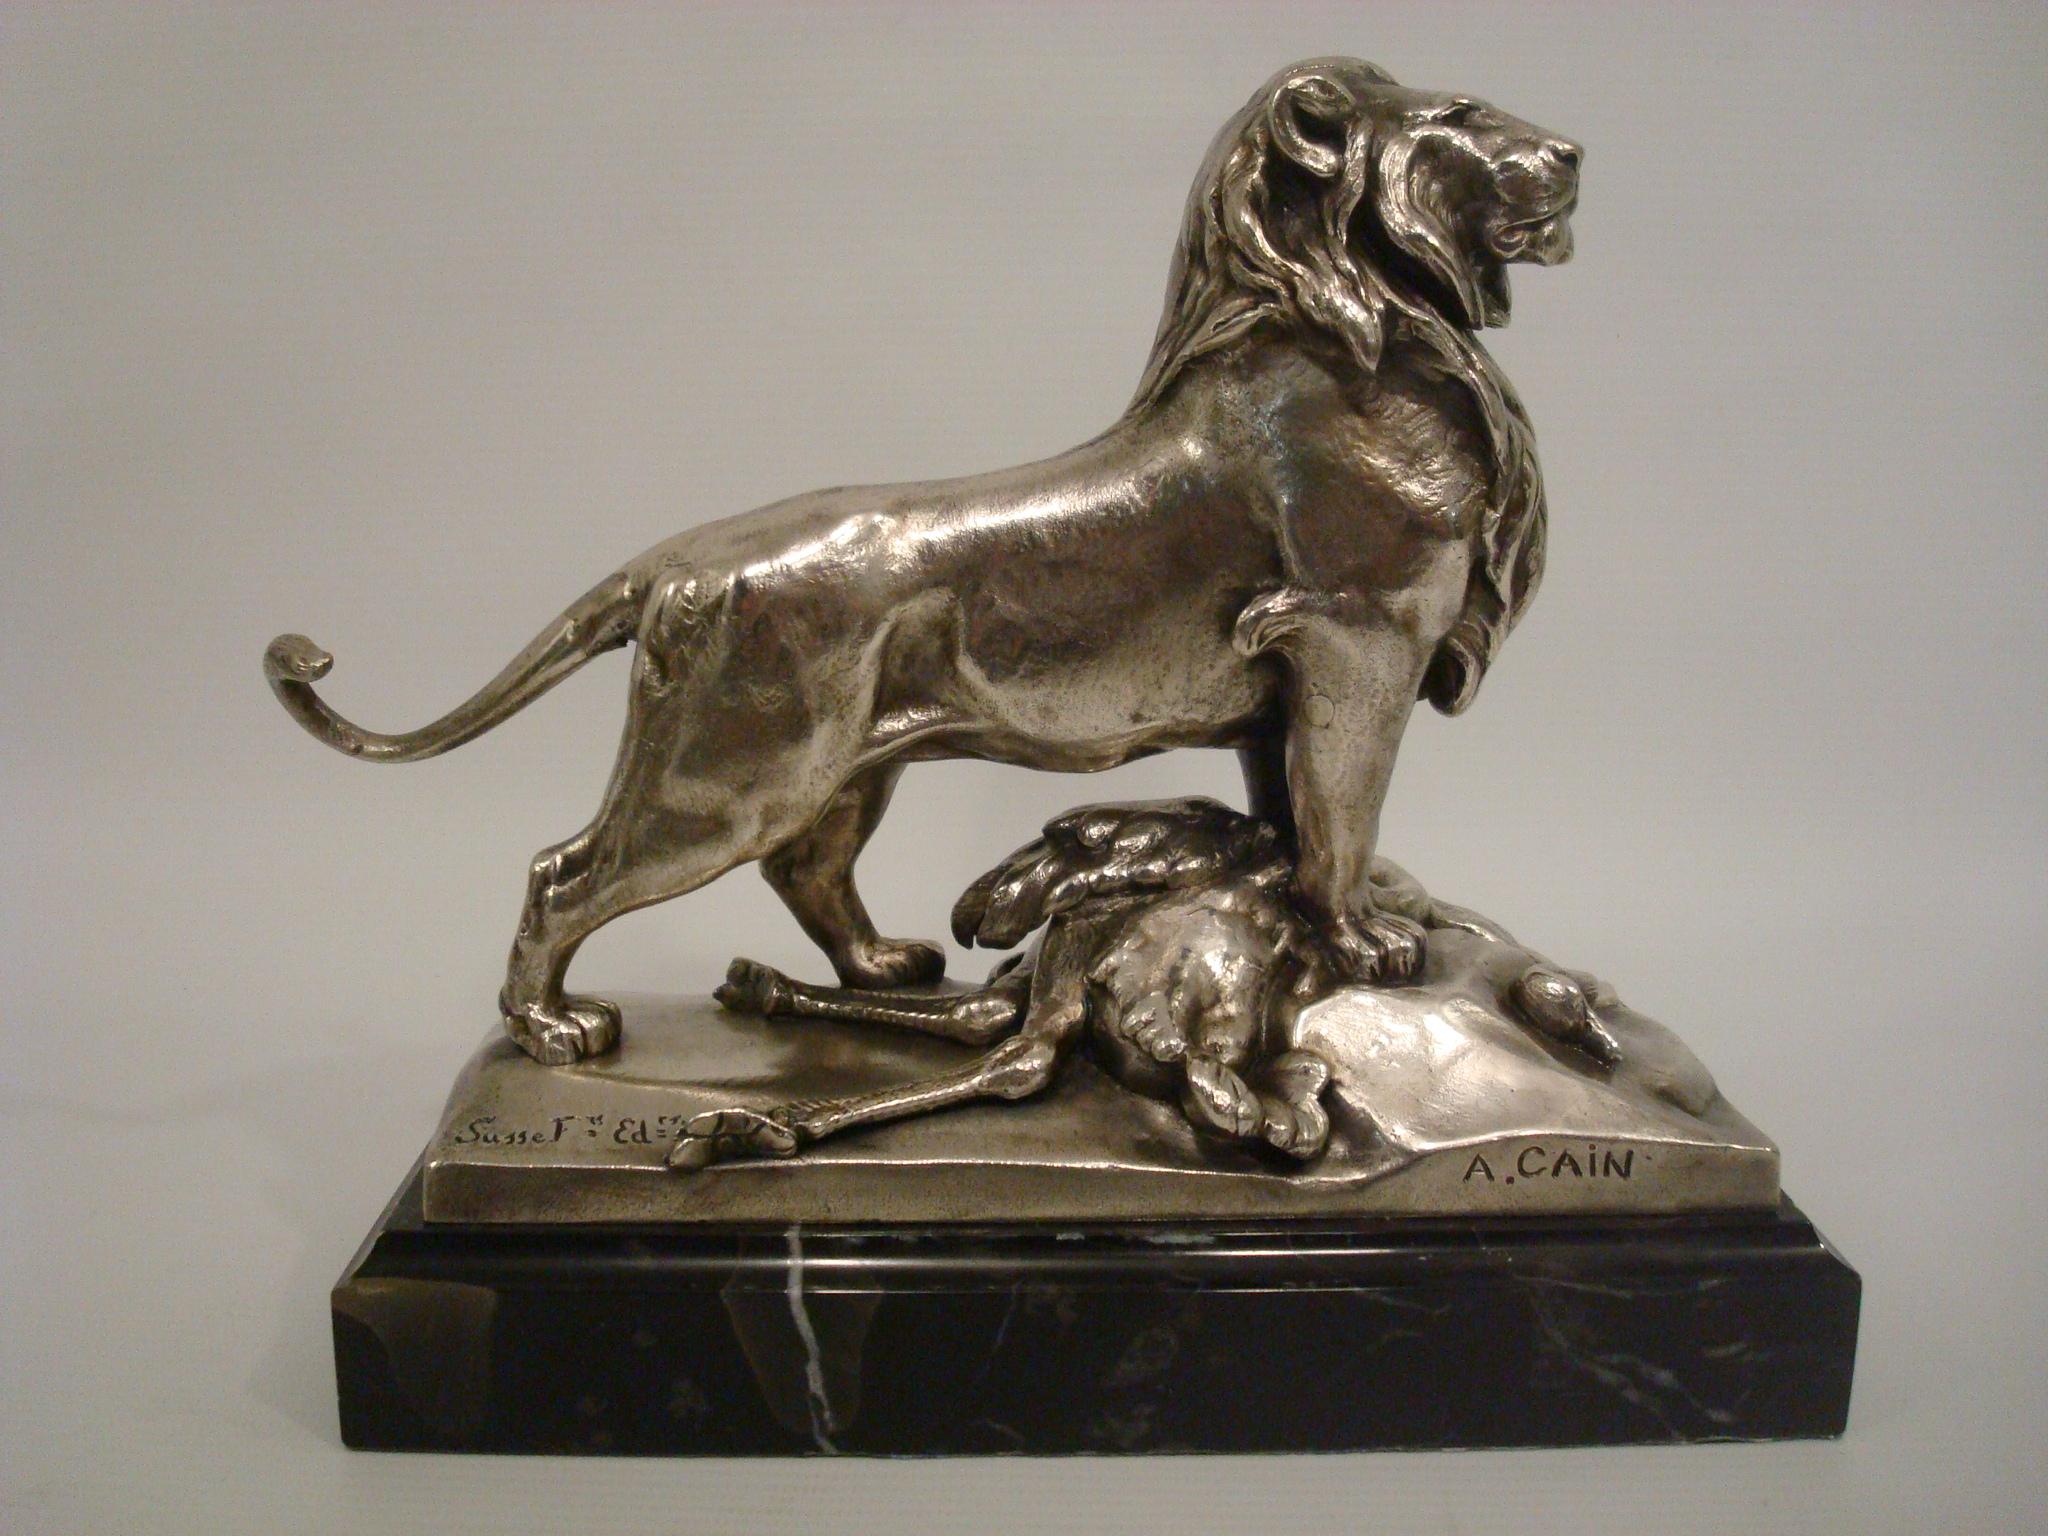 Auguste Cain Silvered Bronze Lion & Ostrich (1822-1894). This fine bronze shows a male lion standing proud, his front right foot is perched on a rock and his left stands firmly on his pray, an ostrich; he has a full mane and a curling tail, has good